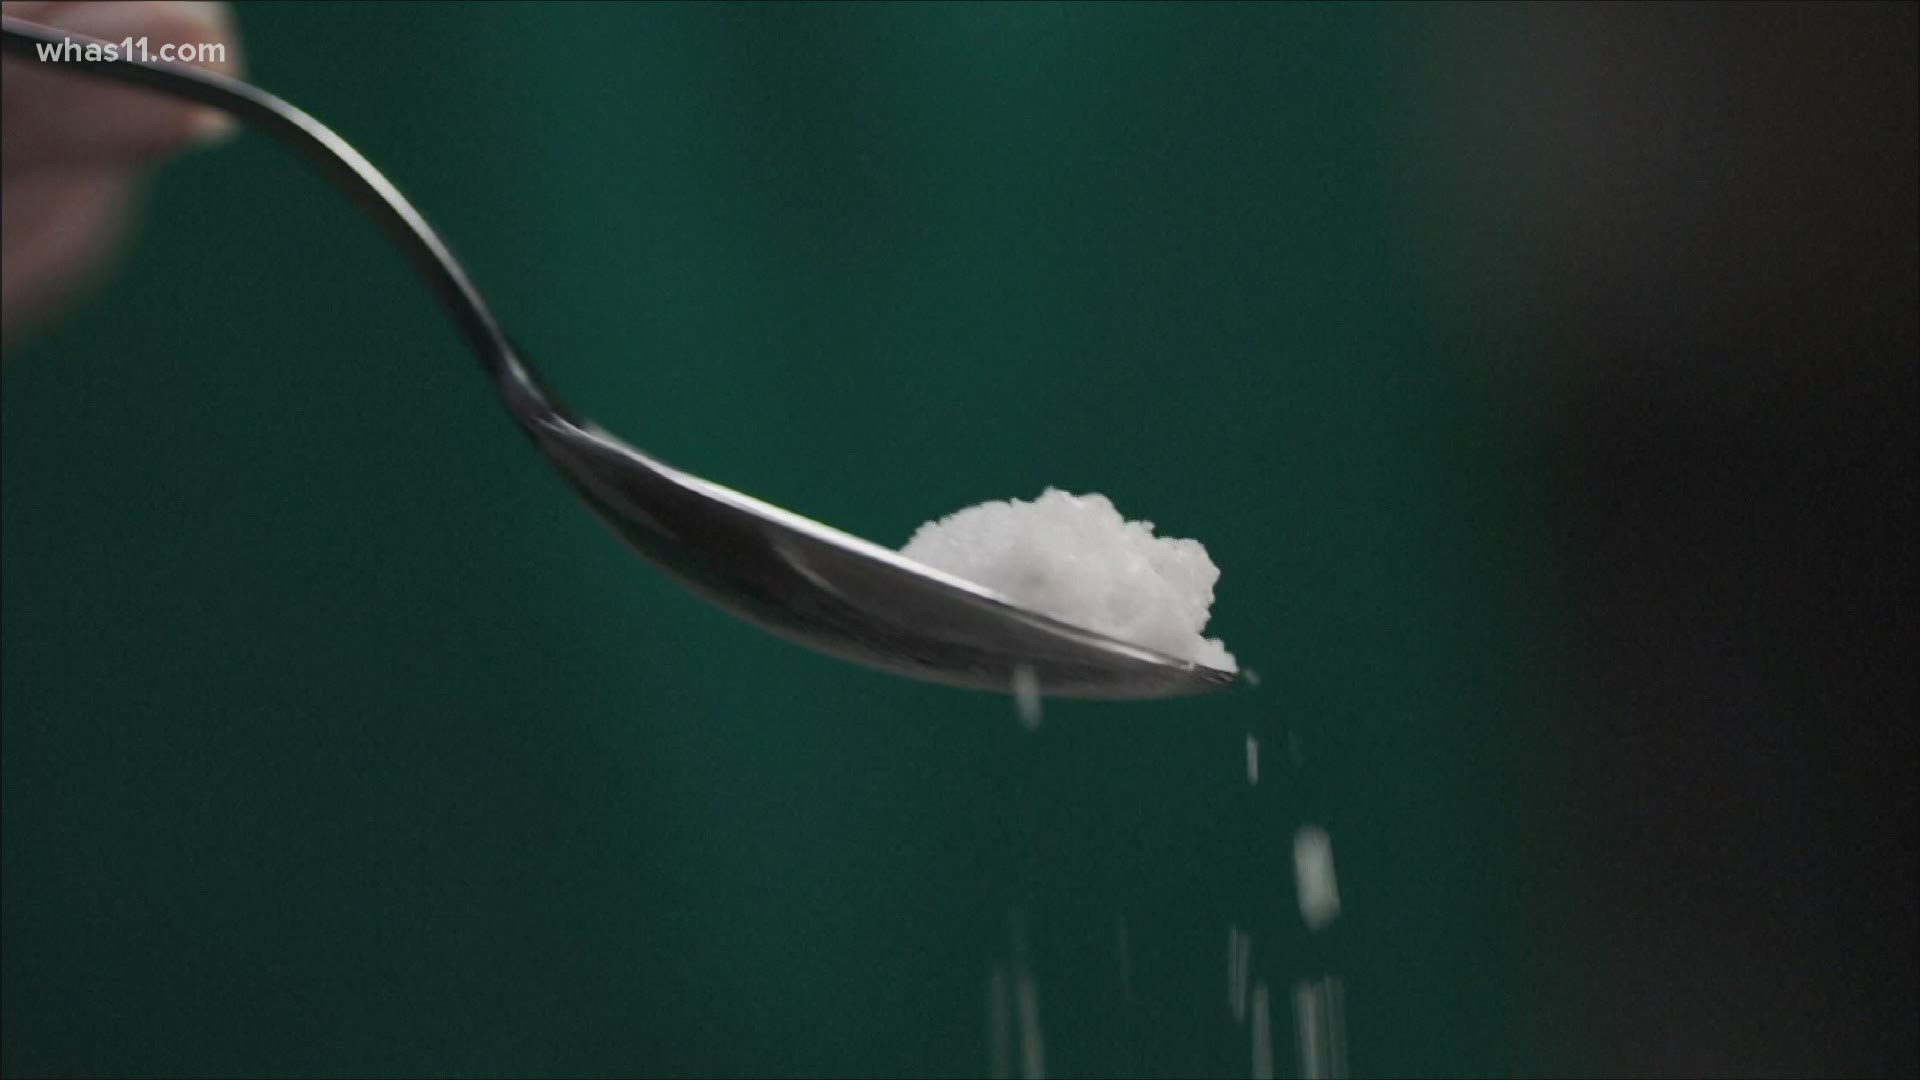 Experts say just rinsing cottage cheese underwater for three minutes and reduce the salt content by 63%.